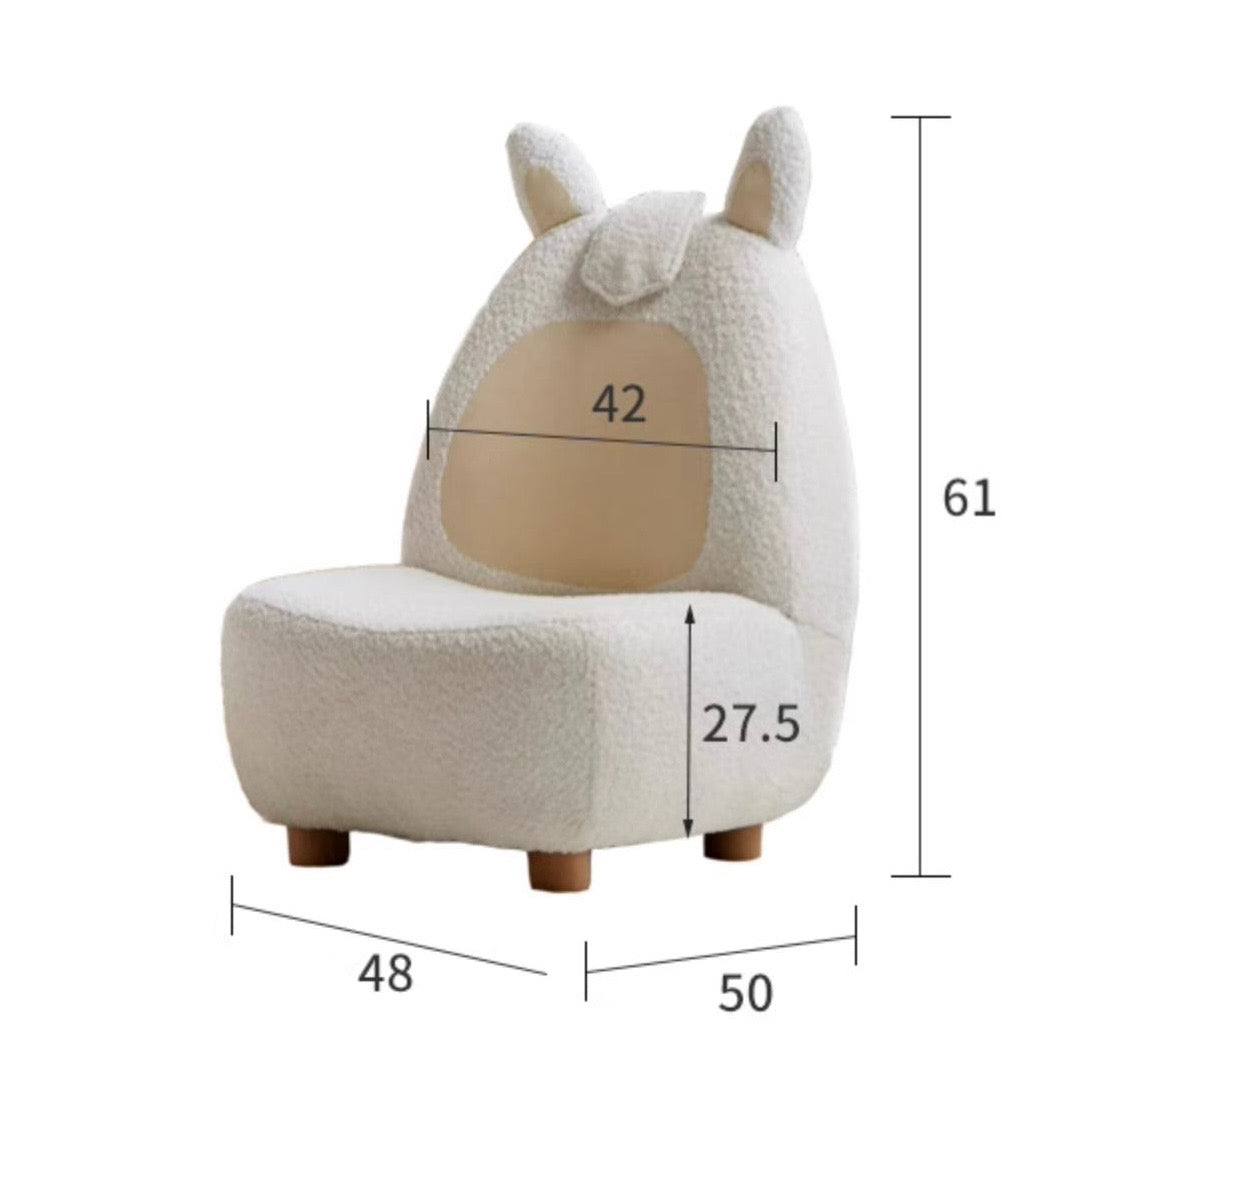 Baby seat cartoon removable and washable lamb velvet"